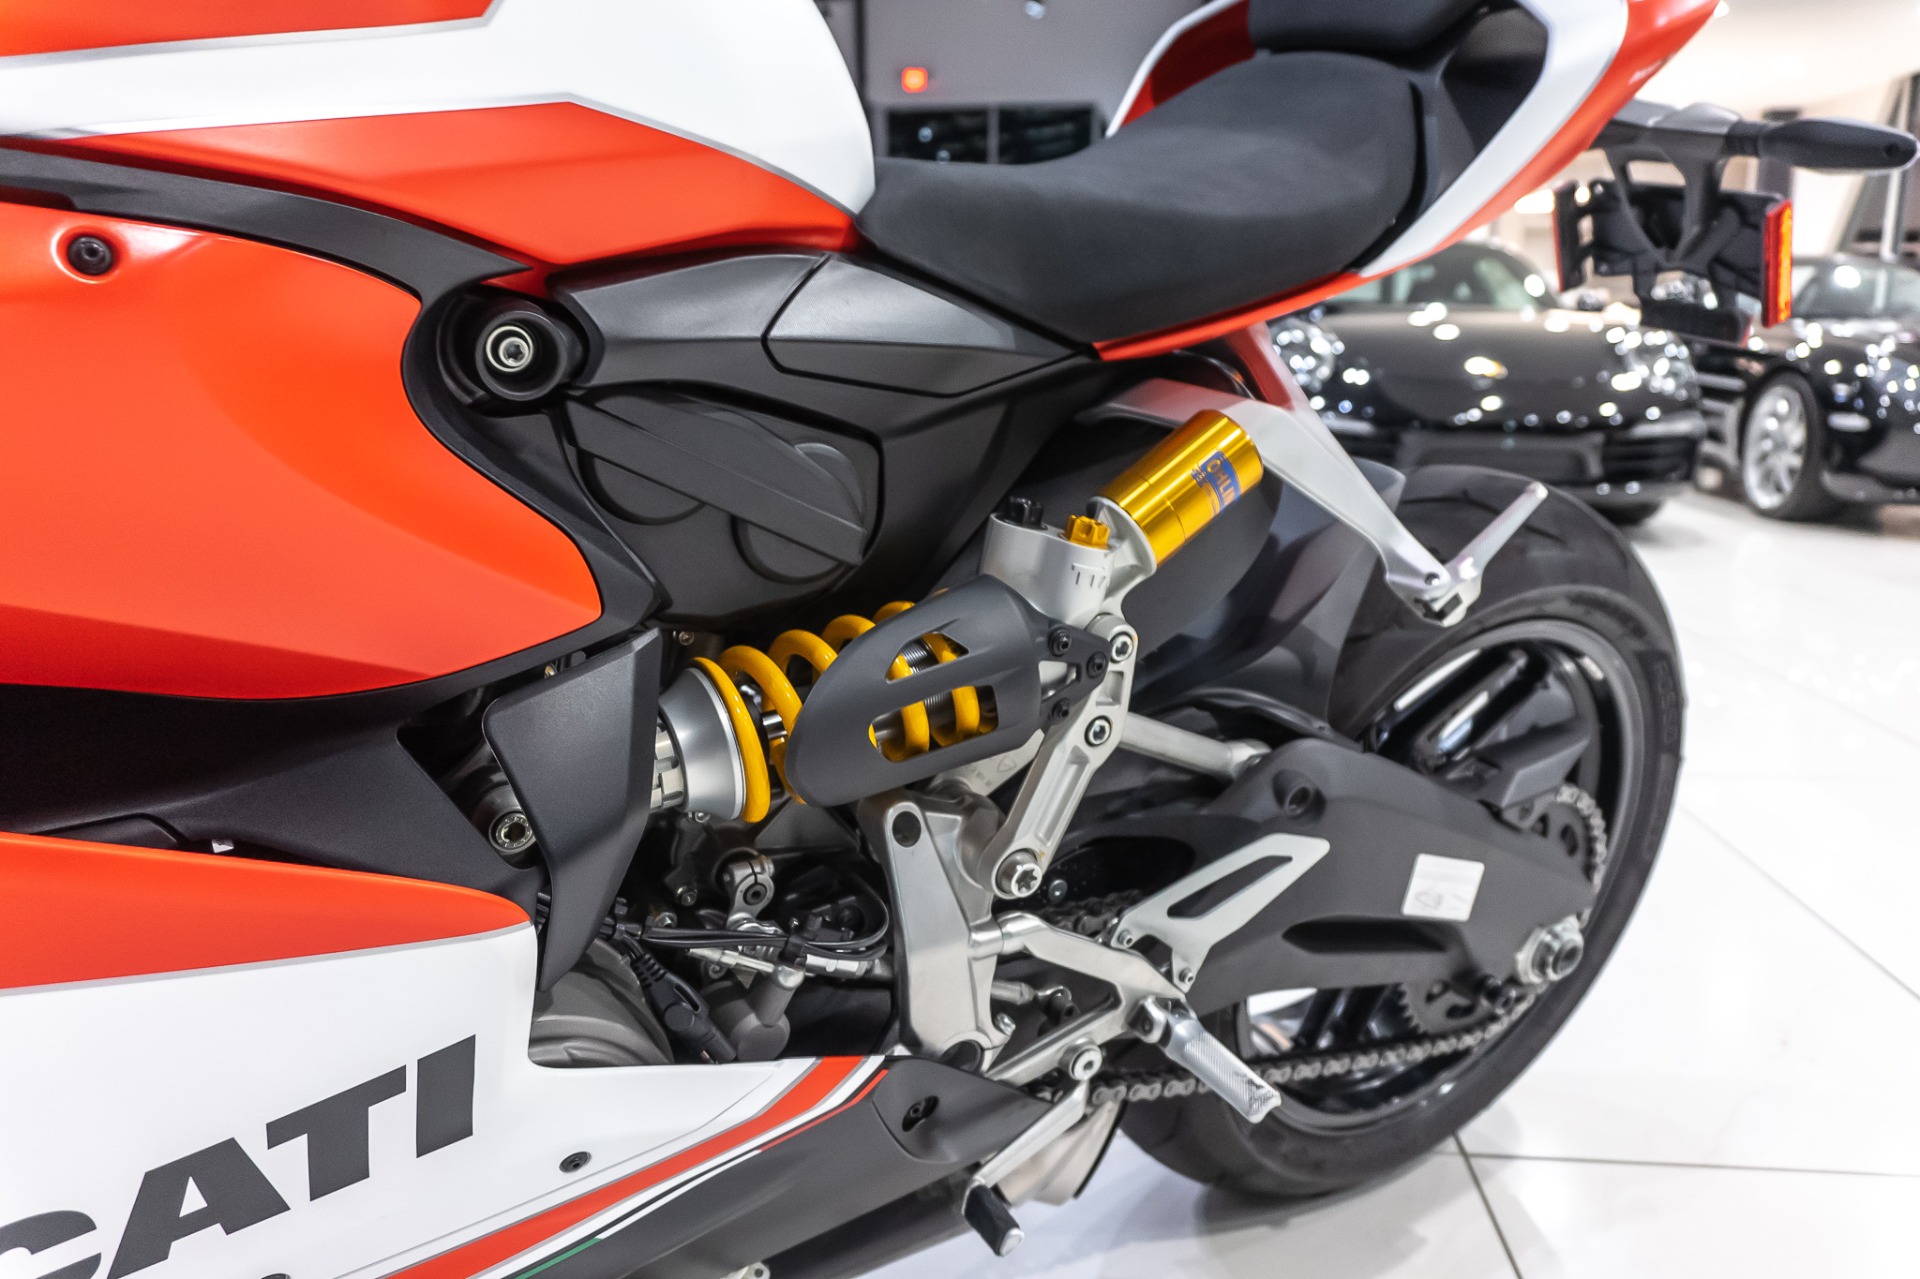 Used-2018-DUCATI-959-PANIGALE-CORSE-SUPERBIKE-ONLY-1382-MILES-ONE-OWNER